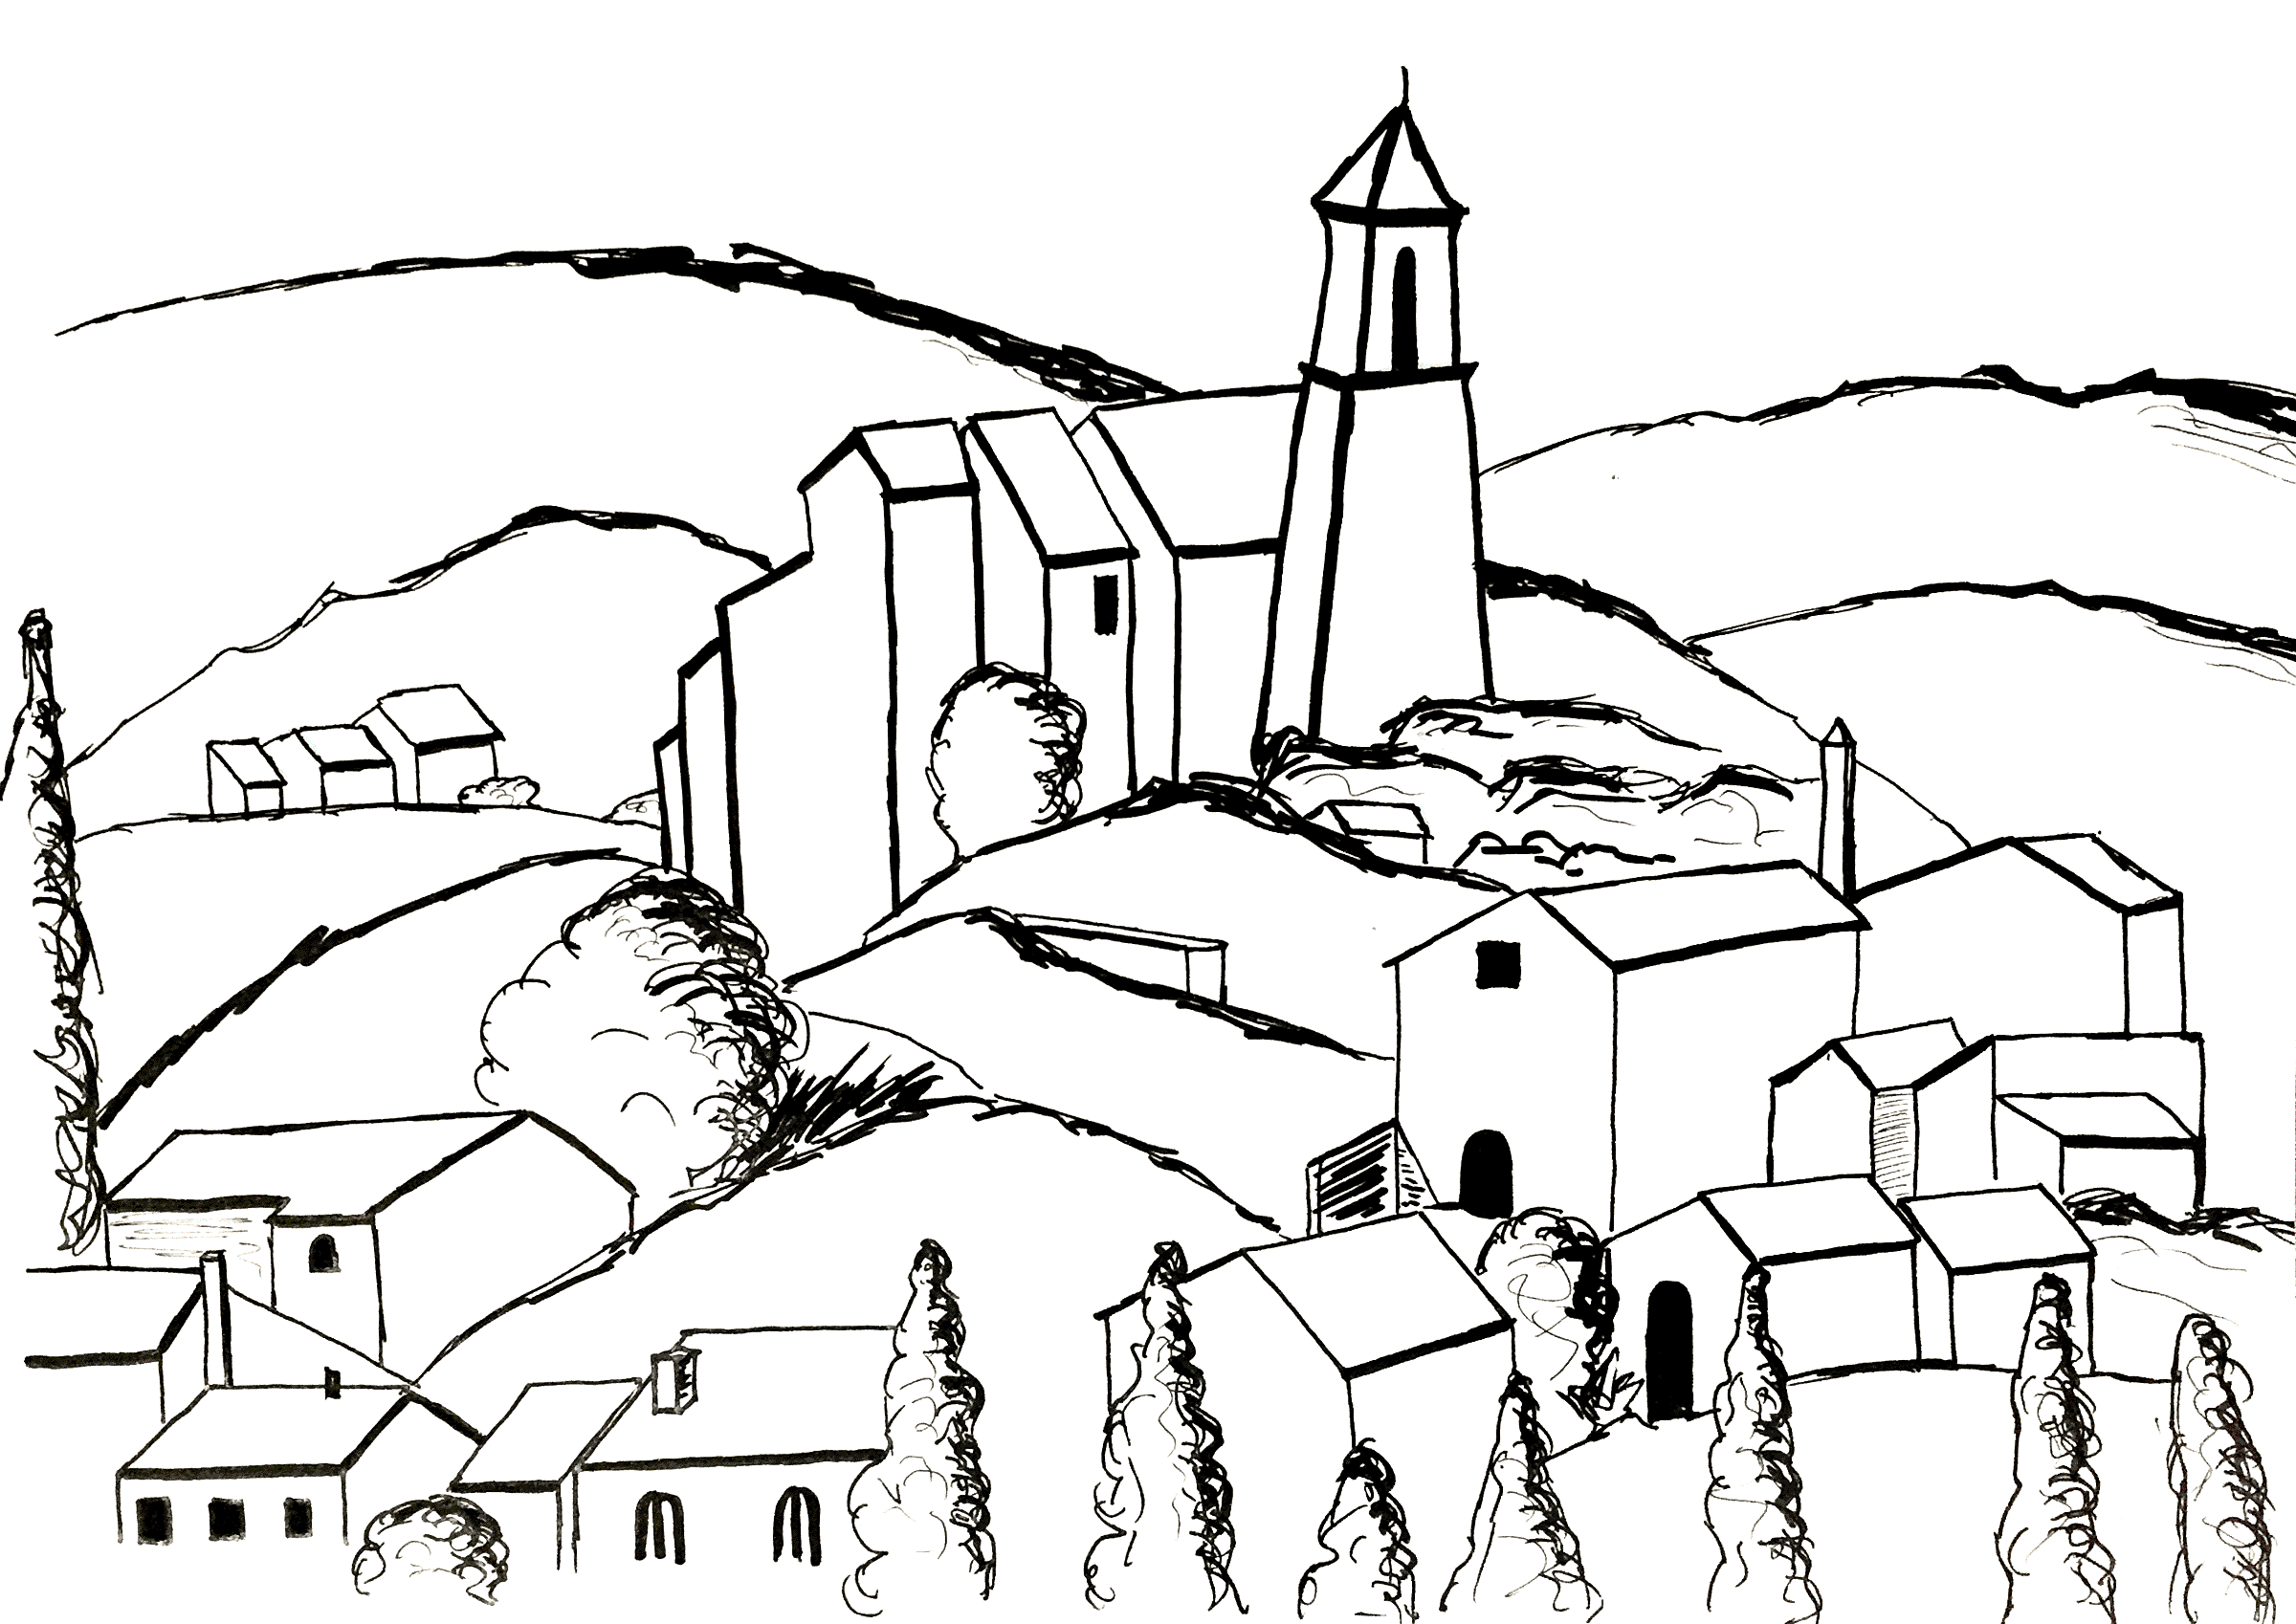 Coloring page inspired by a painting of Paul Cézanne: Gardanne (version 2). Gardanne, a village located in France, in the Provence-Alpes-Côte d'Azur region, is the only village painted by Cézanne, Artist : Olivier